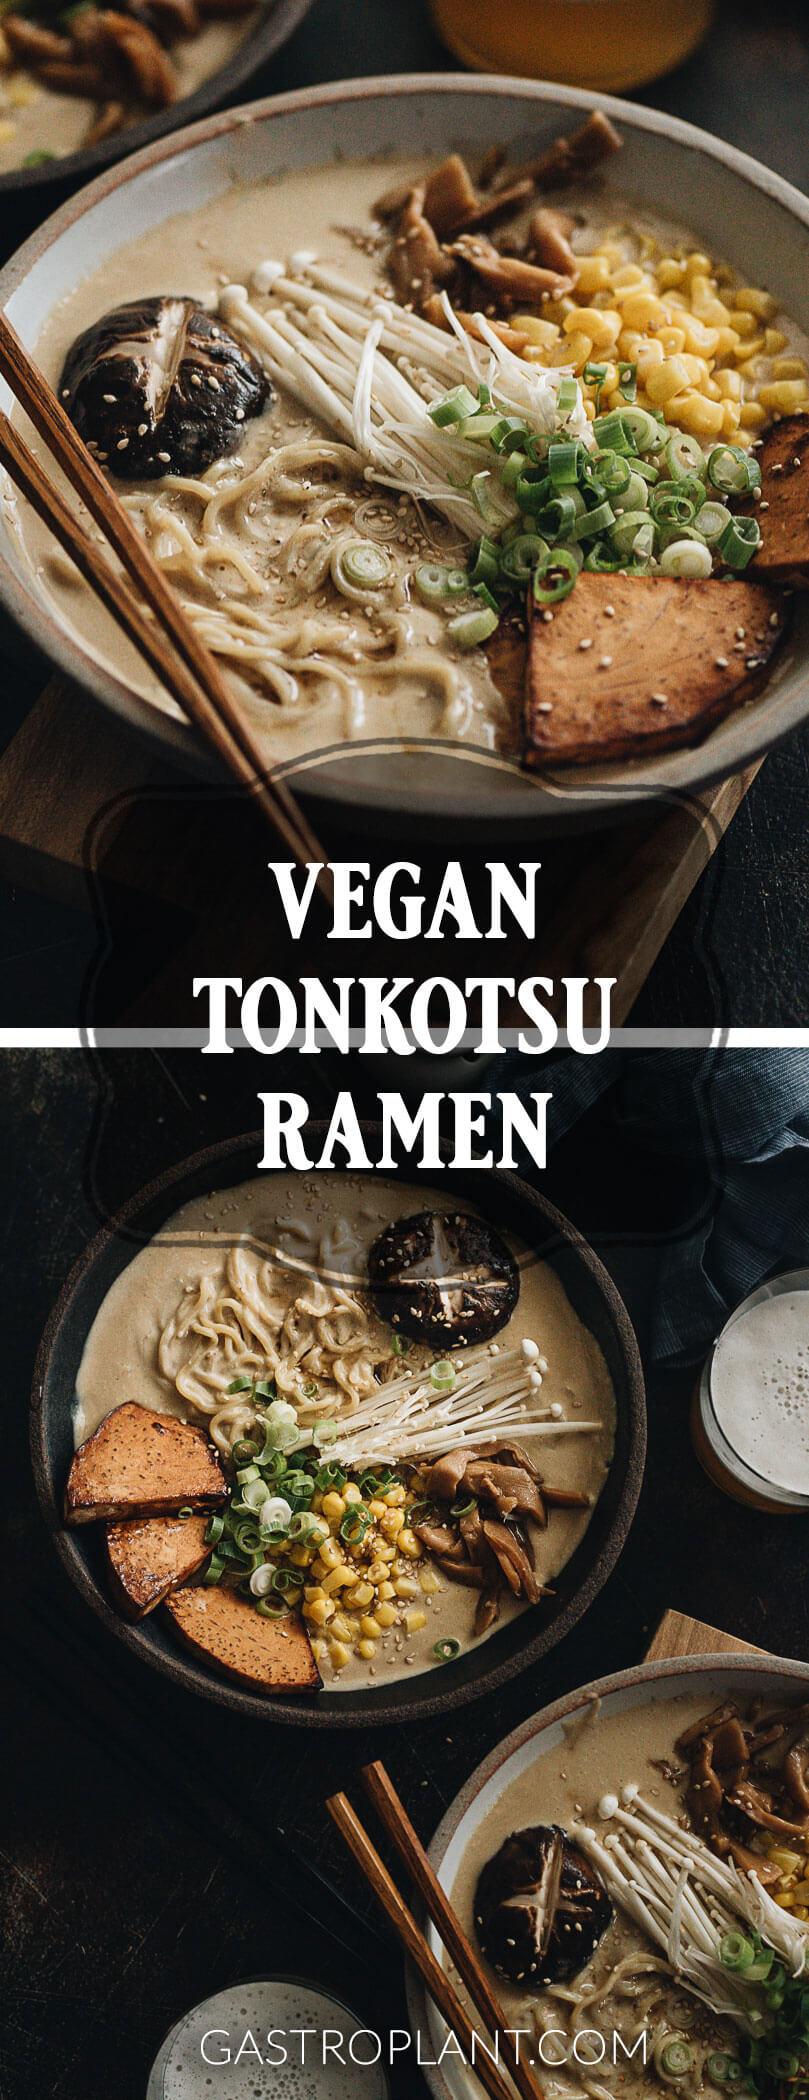 Vegan Tonkotsu Ramen - This vegan ramen recipe is a keeper. It combines a rich and complex plant-based tonkotsu broth, toothy noodles, bamboo shoots, mushrooms, and taro root. You’ll want more than one bowl of this one.